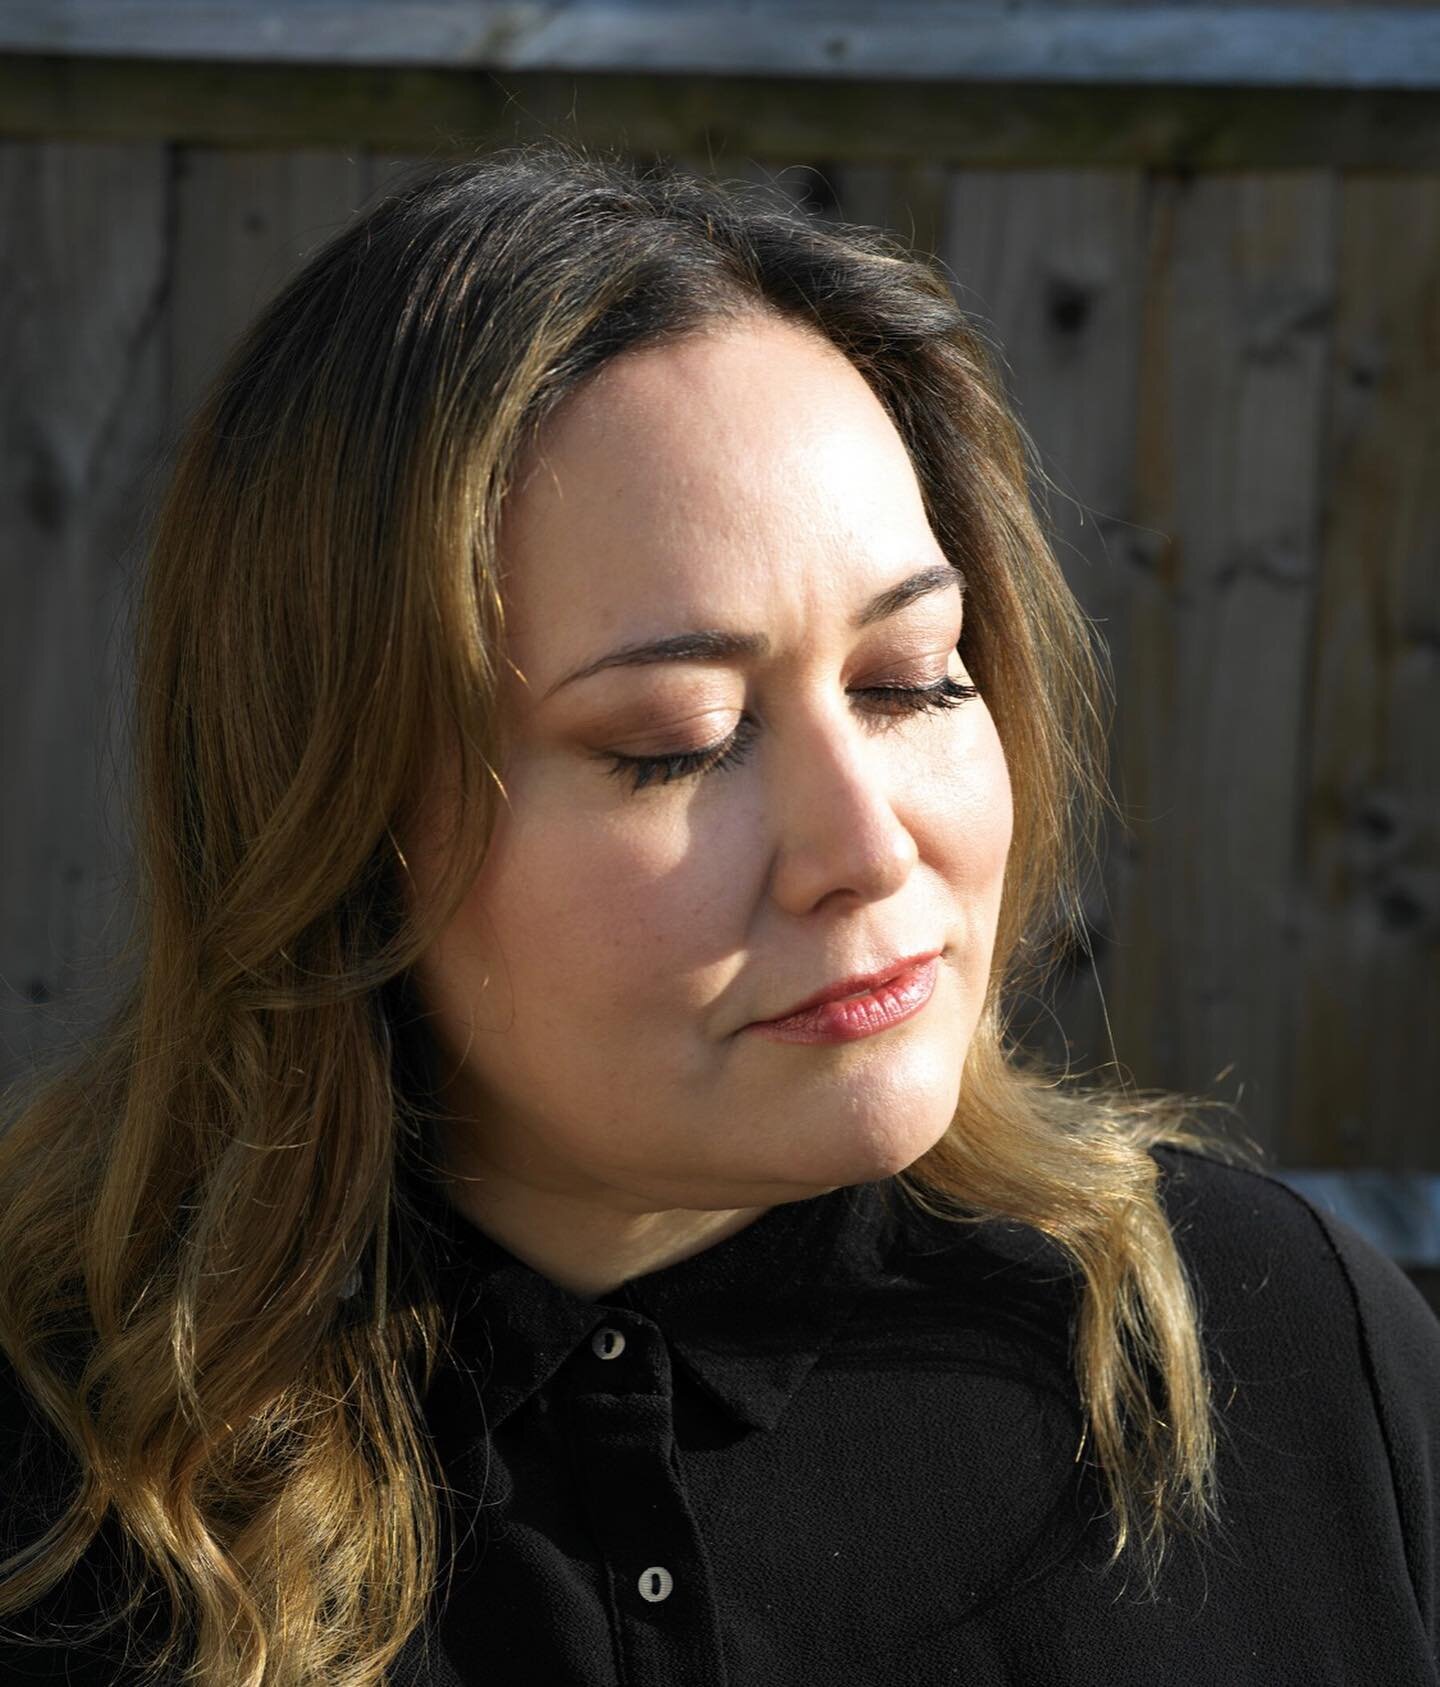 Our homegirl in the New York Times! @tanyasaracho : &ldquo;I don&rsquo;t understand why they don&rsquo;t take a chance on us but they will take a chance on the most tepid refried-bean cop show,&rdquo; she said. &ldquo;I think it&rsquo;s a side effect